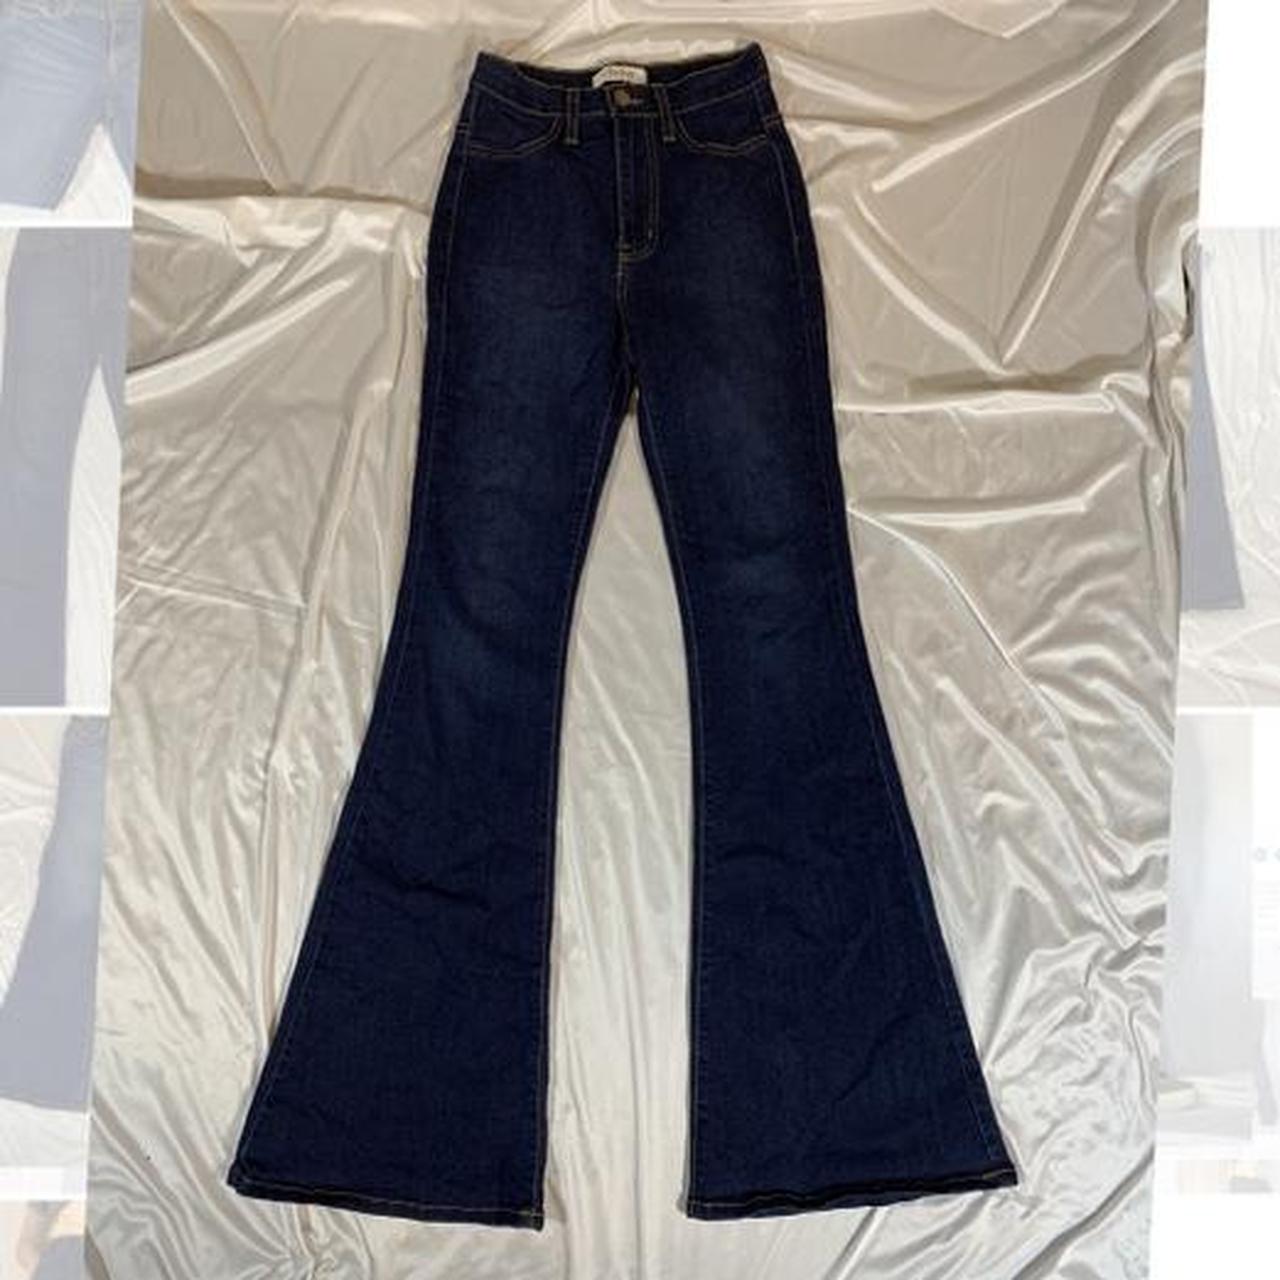 Product Image 2 - Navy high rise flare jeans